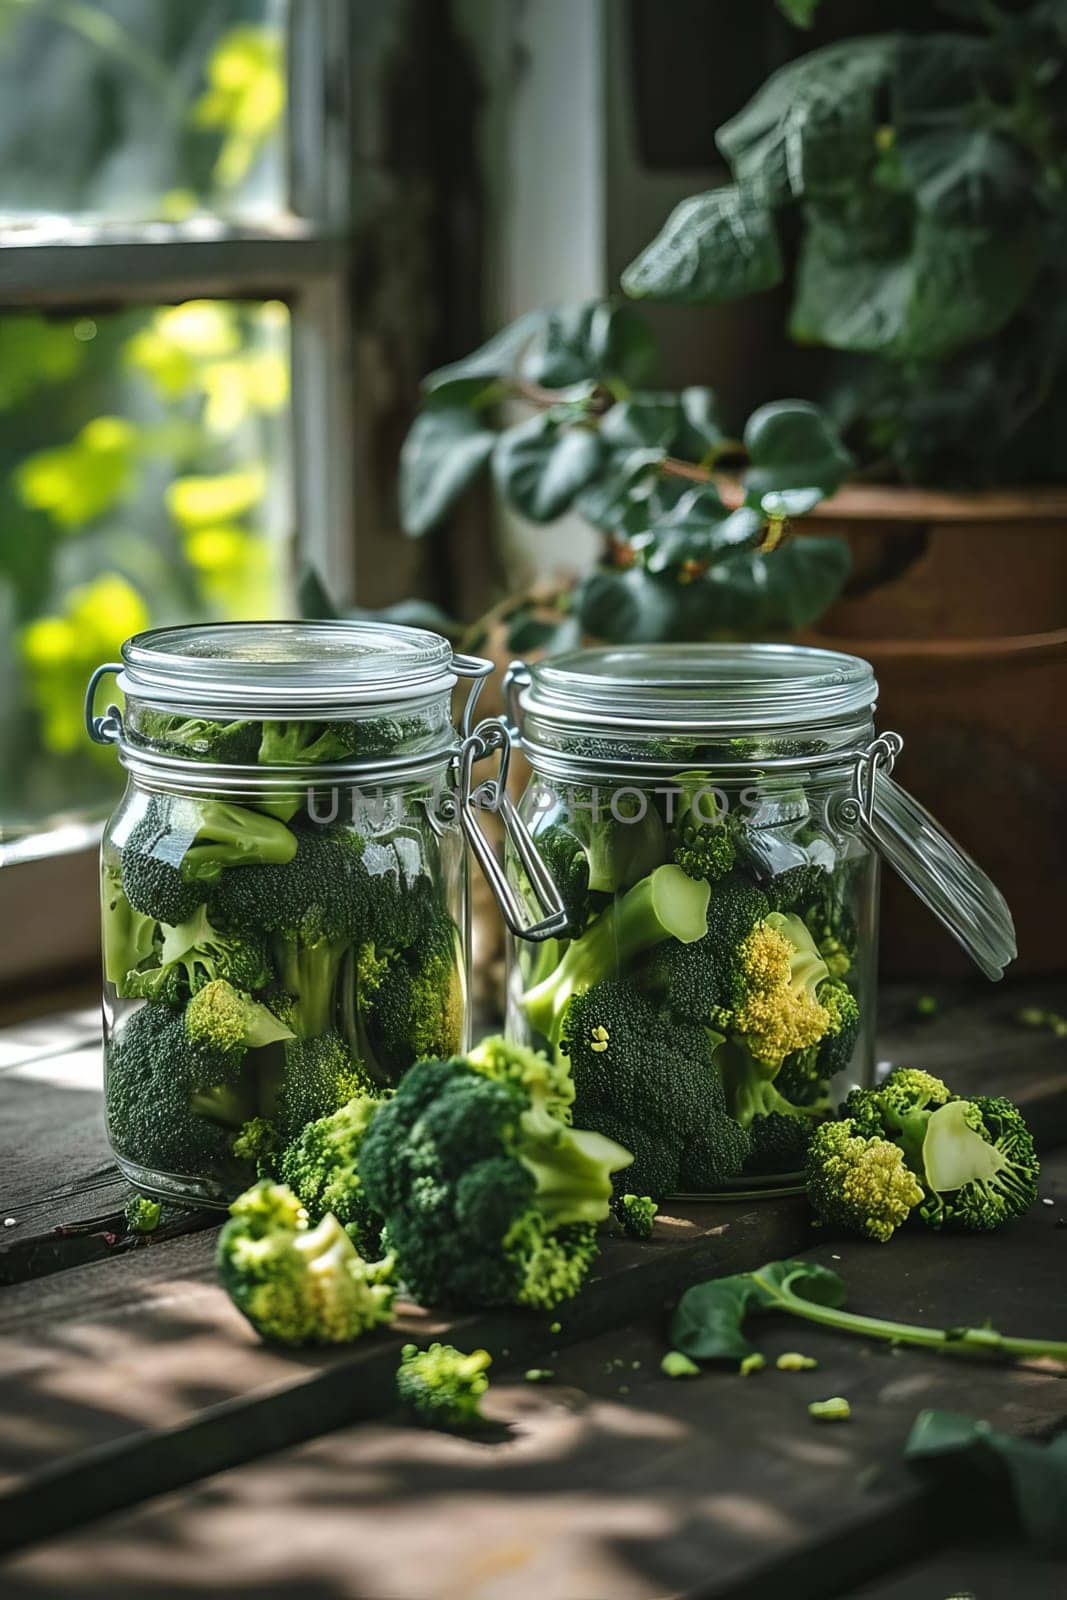 Broccoli canning in the garden. Selective focus. Food.